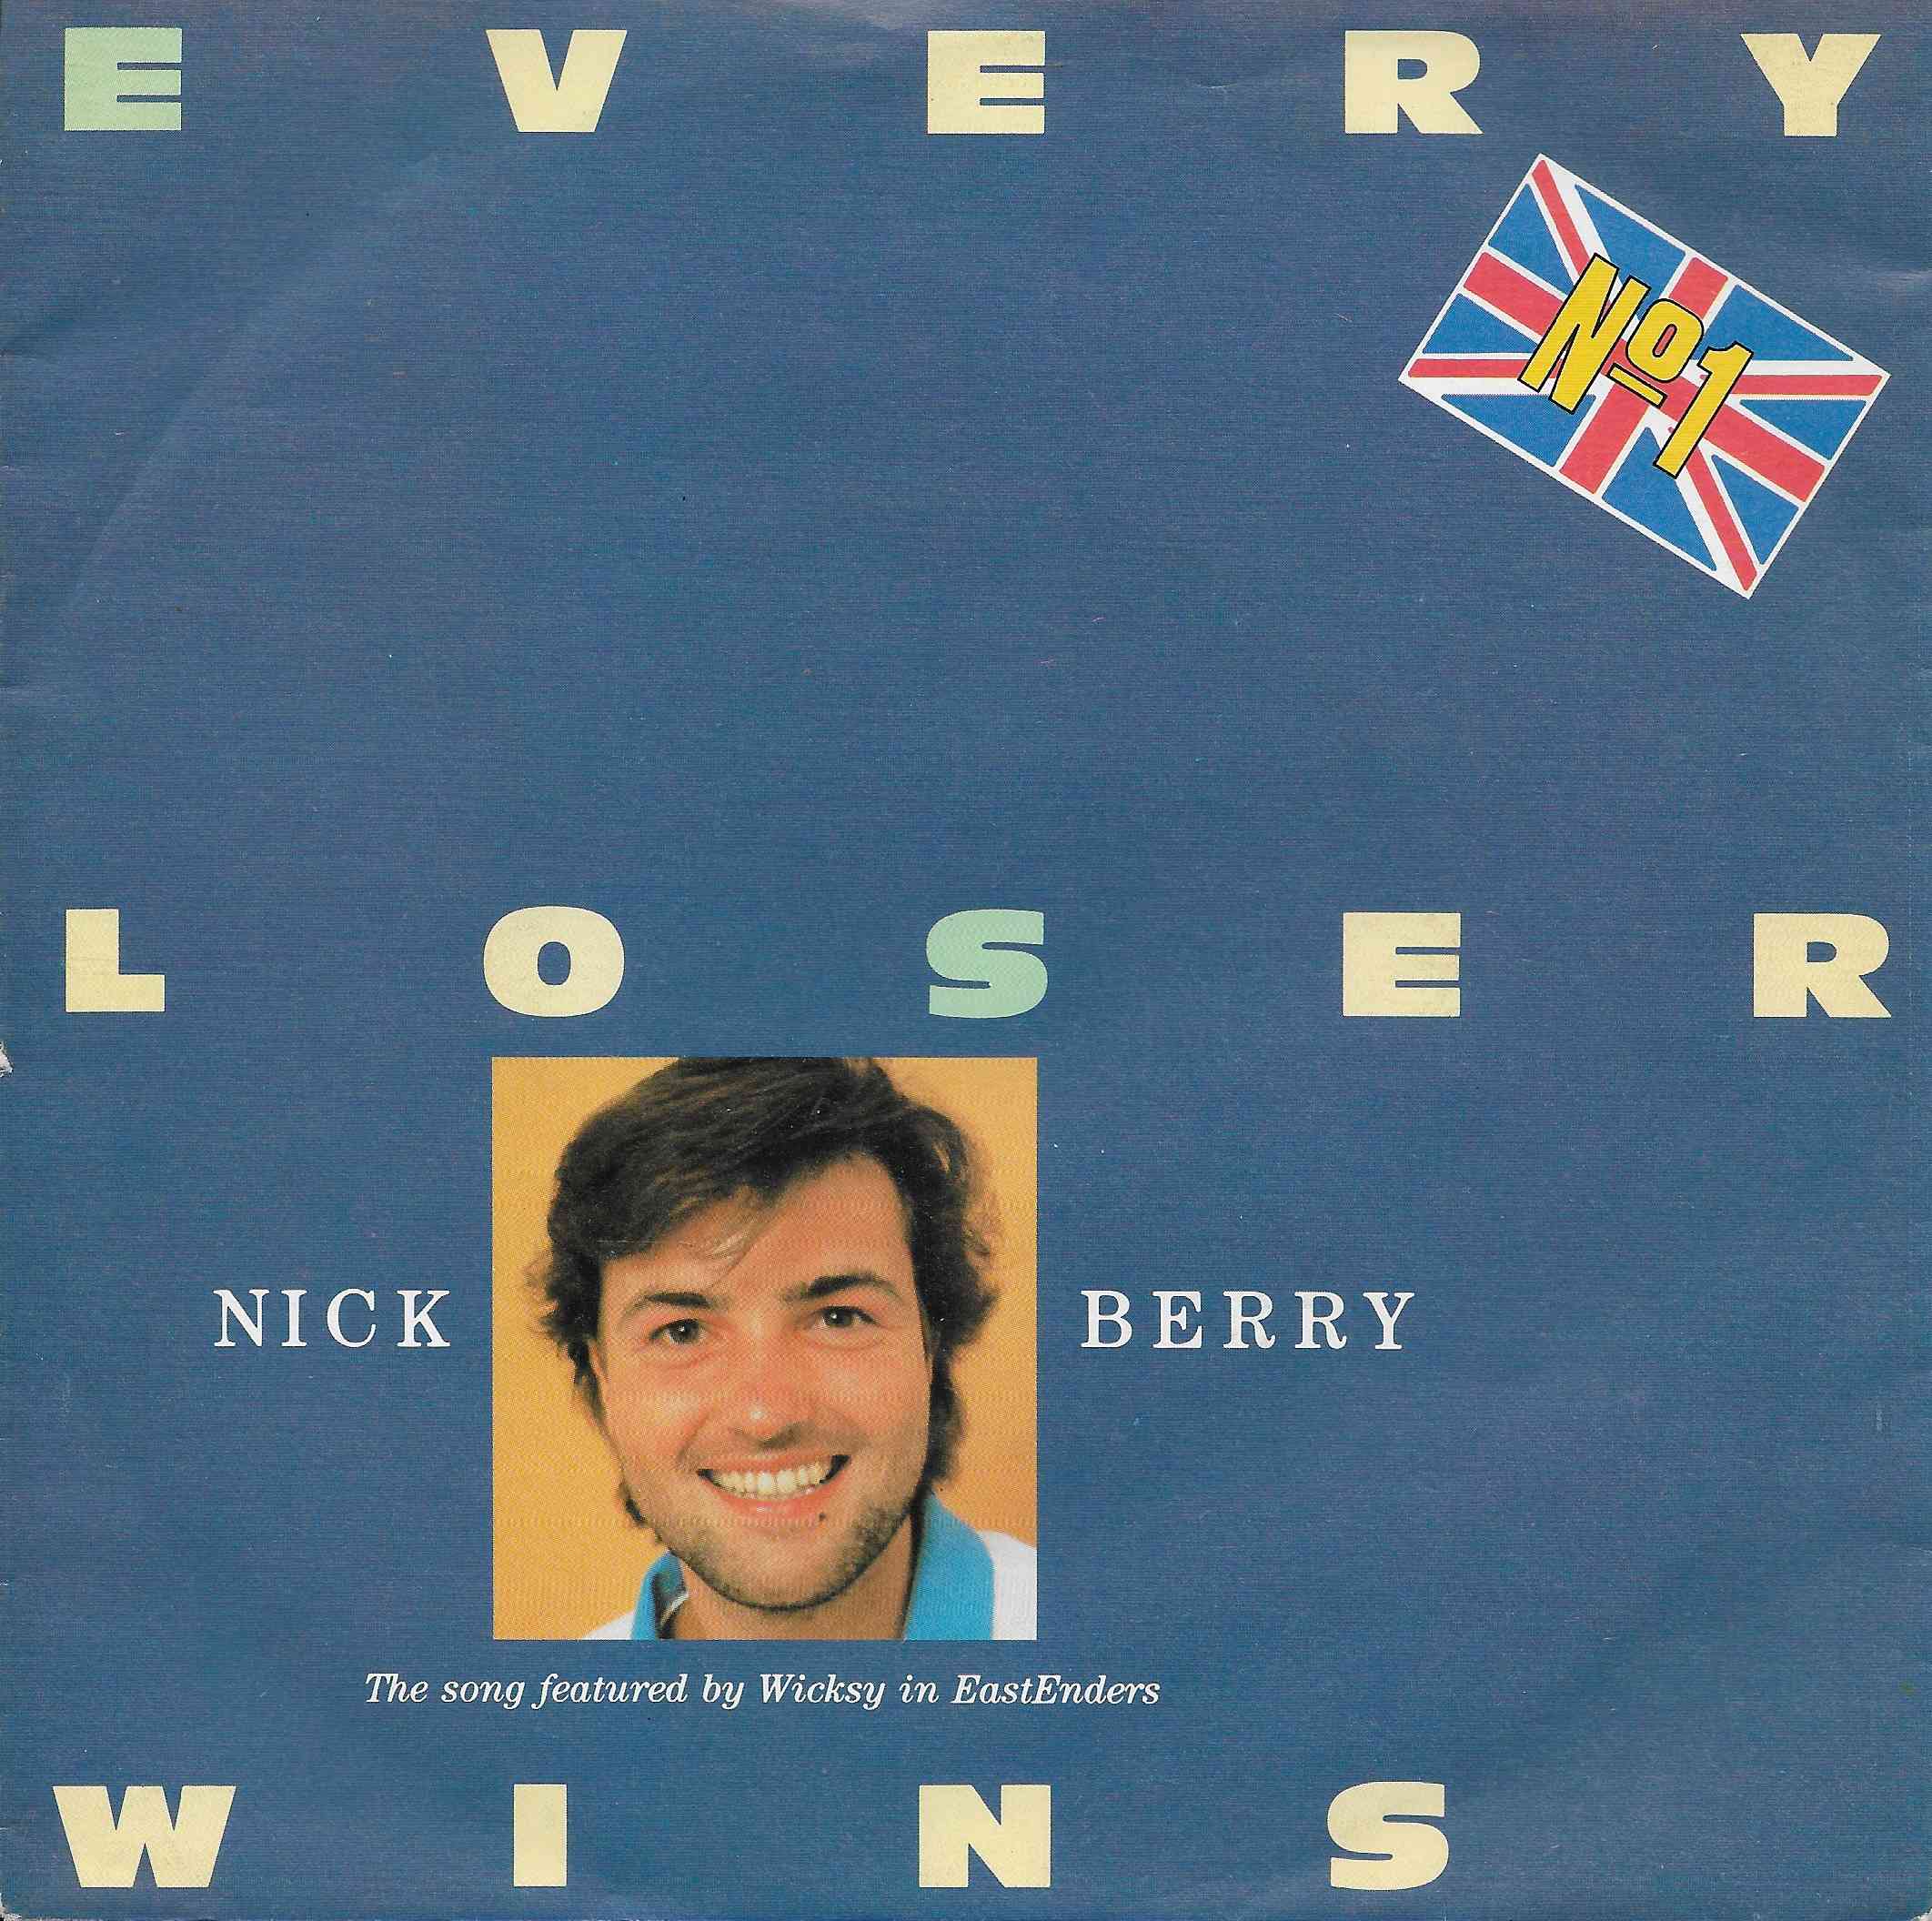 Picture of INT 113.011 Every loser wins (German import) by artist Simon May / Stewart and Bradley James from the BBC records and Tapes library